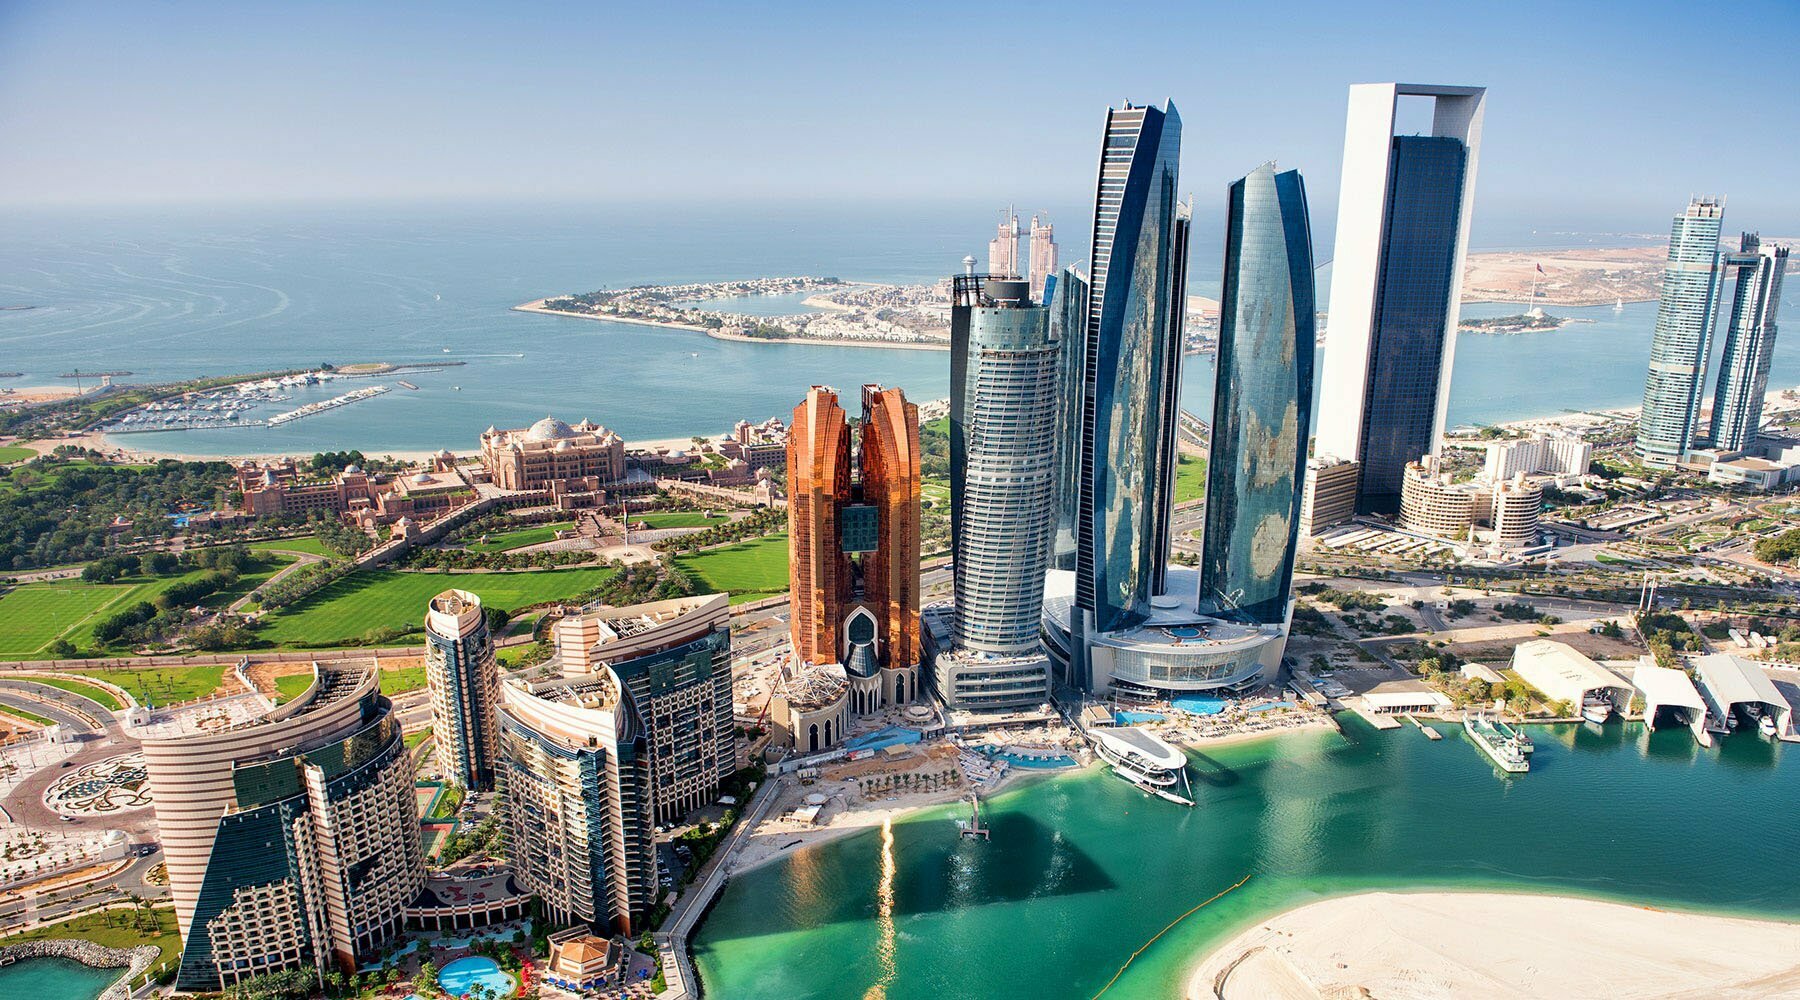 Abu Dhabi is one of the safest cities in the world